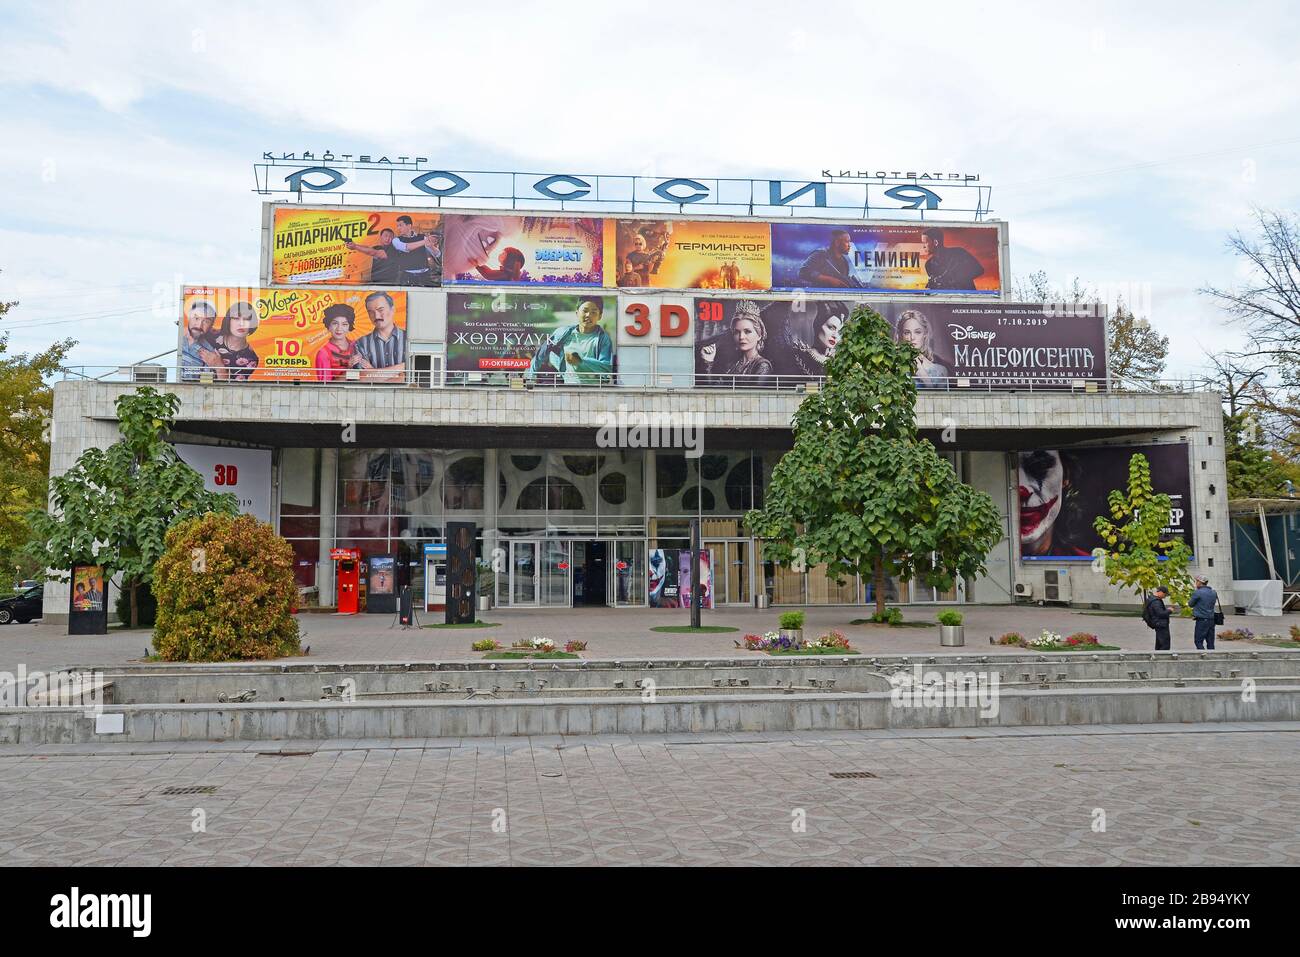 Exterior view of a Kyrgyz cinema built in the USSR times in Bishkek, Kyrgyzstan. Russia written in Cyrillic. Soviet architecture style. Kino Theater. Stock Photo